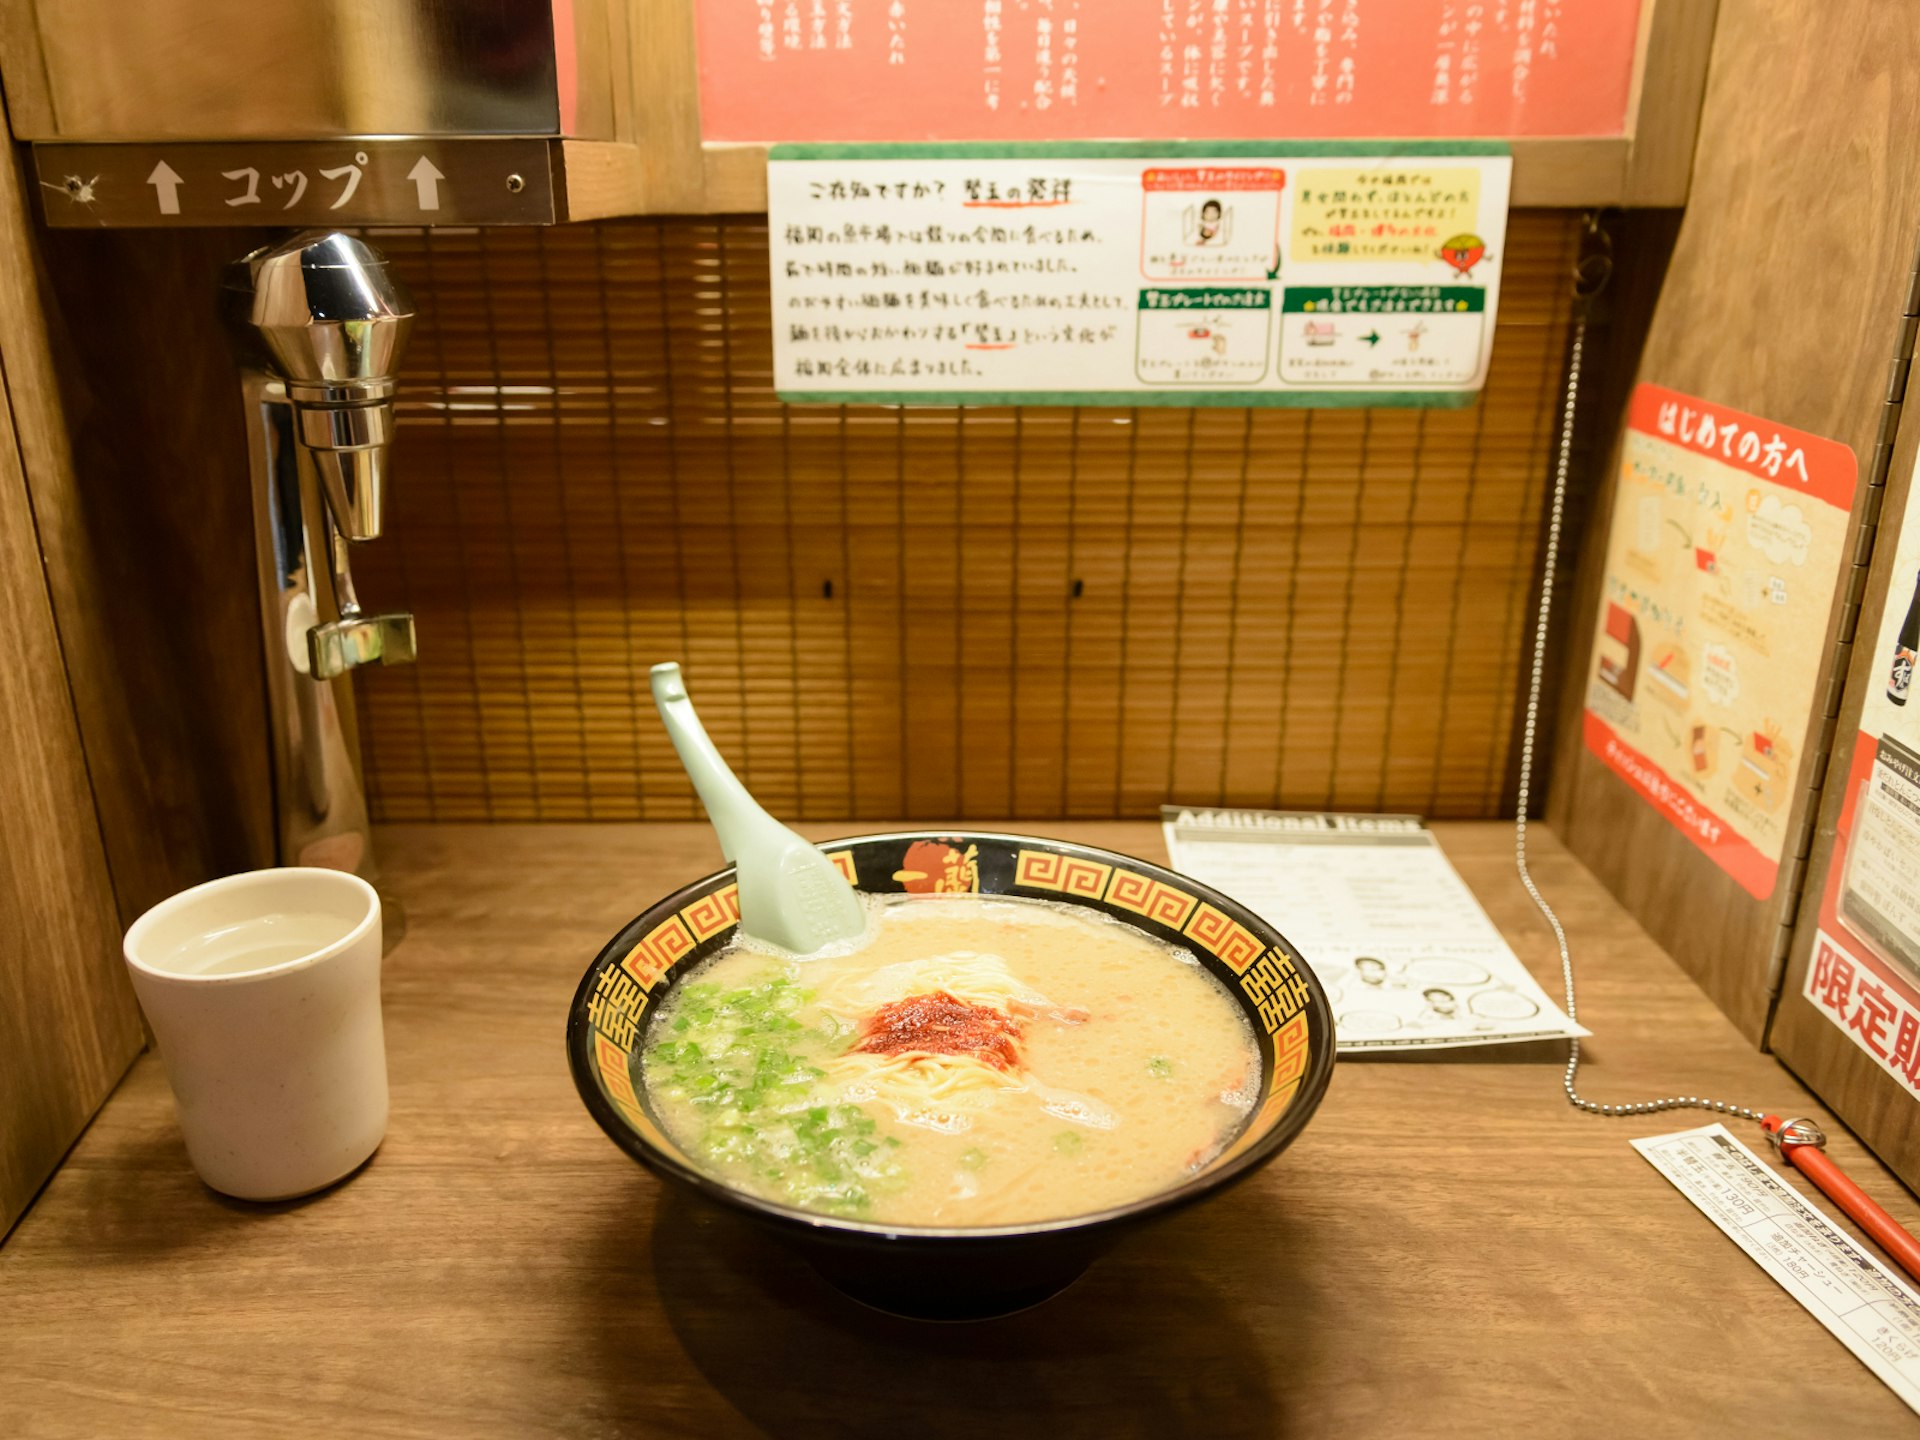 A bowl of ramen in a cubicle of an Ichiran branch in Japan